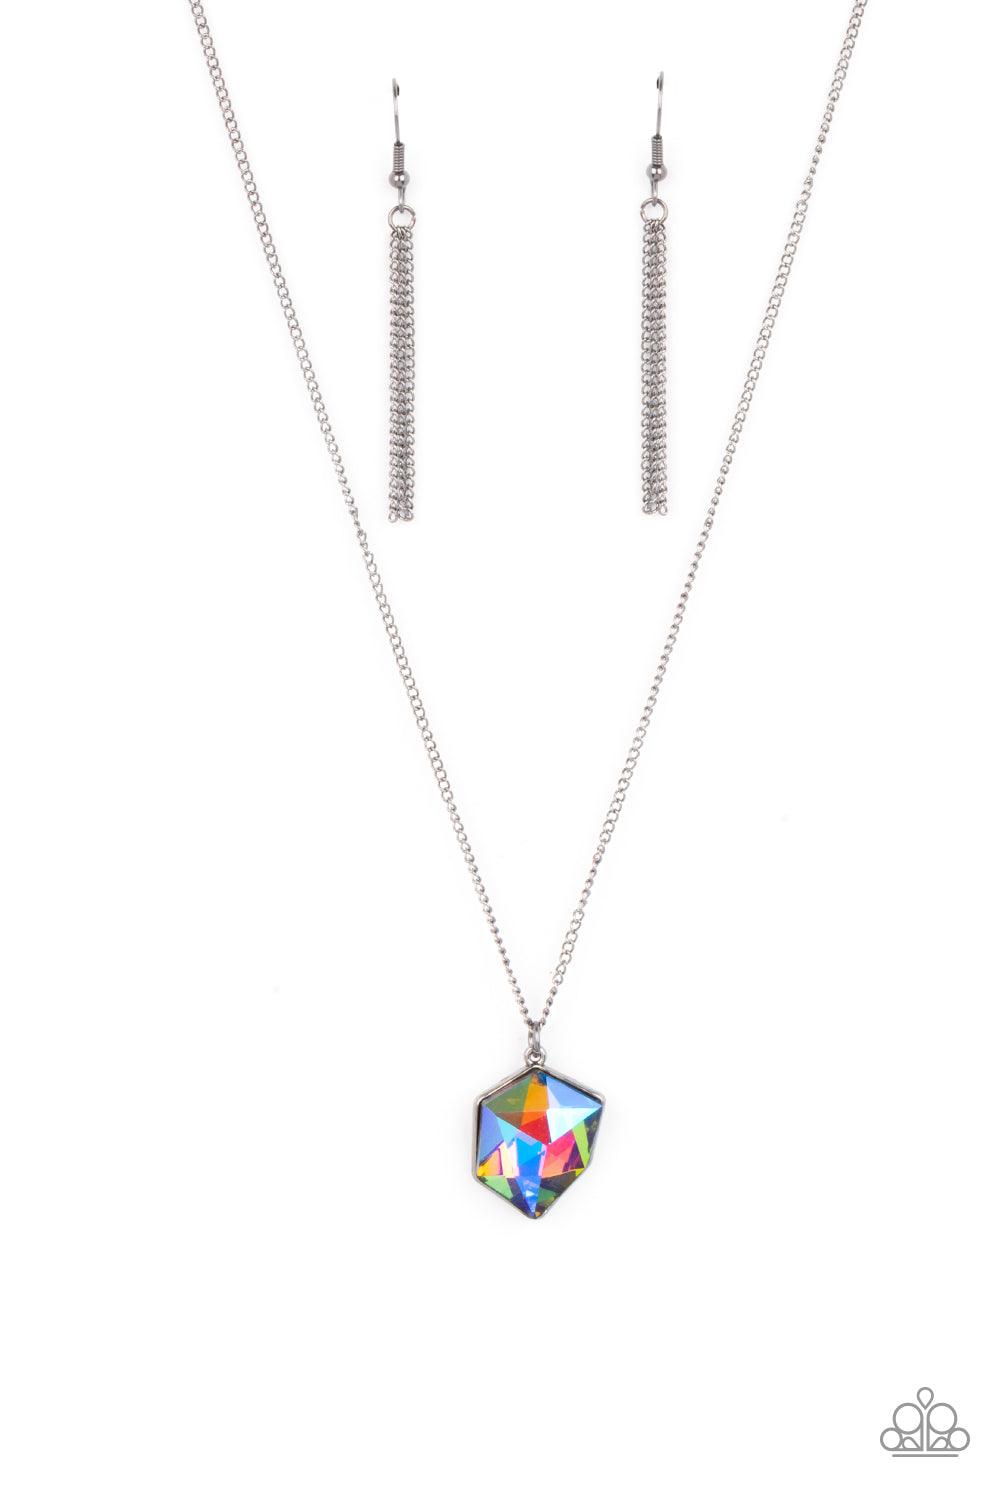 Paparazzi Accessories Stellar Serenity - Multi Featuring an oil spill shimmer, an iridescent raw-cut gem dazzles below the collar, creating out-of-this-world sparkle. Features an adjustable clasp closure. Sold as one individual necklace. Includes one pair